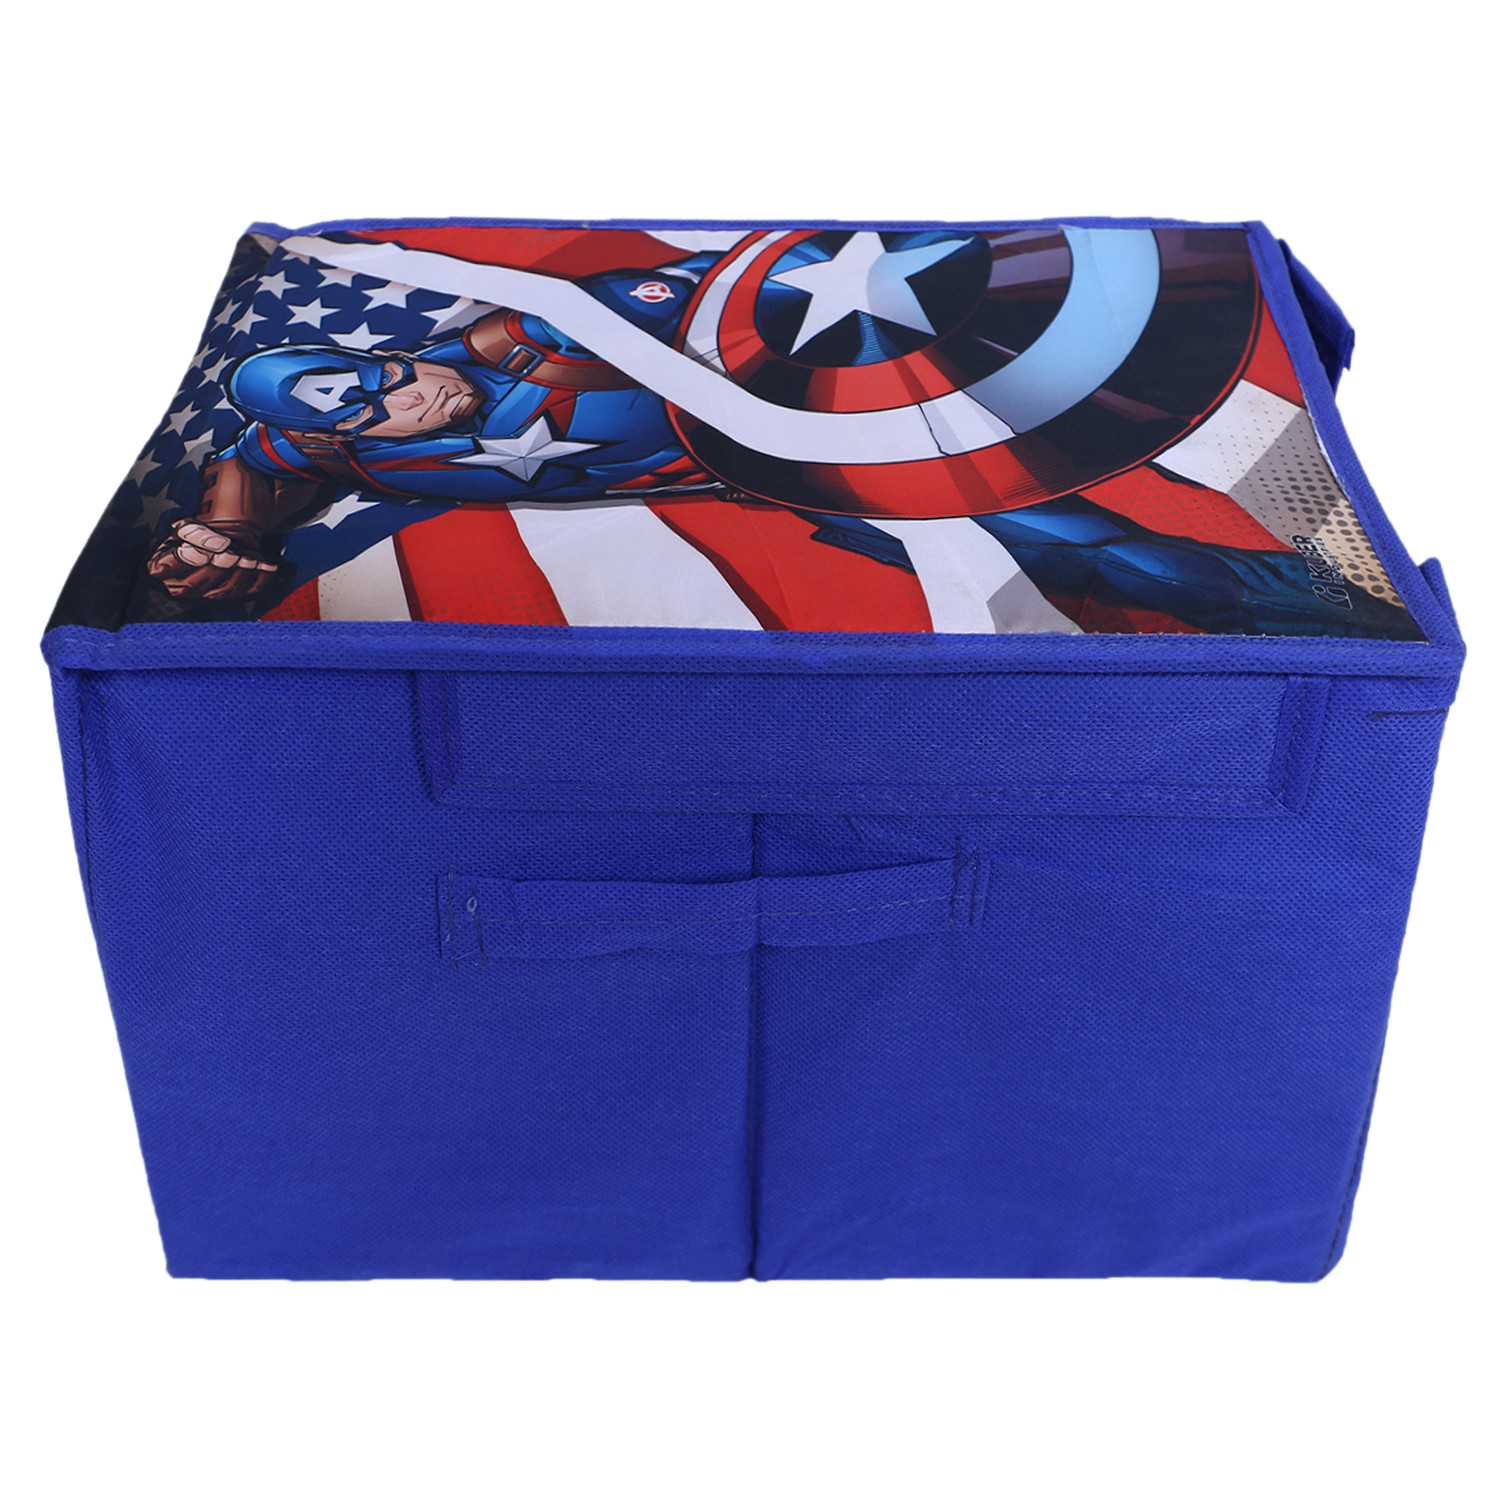 Kuber Industries Marvel Captain America Shirt Stacker|Wardrobe Organizer For Clothes|Non-Woven Wardrobe Organizer for Home With Lid (Blue)